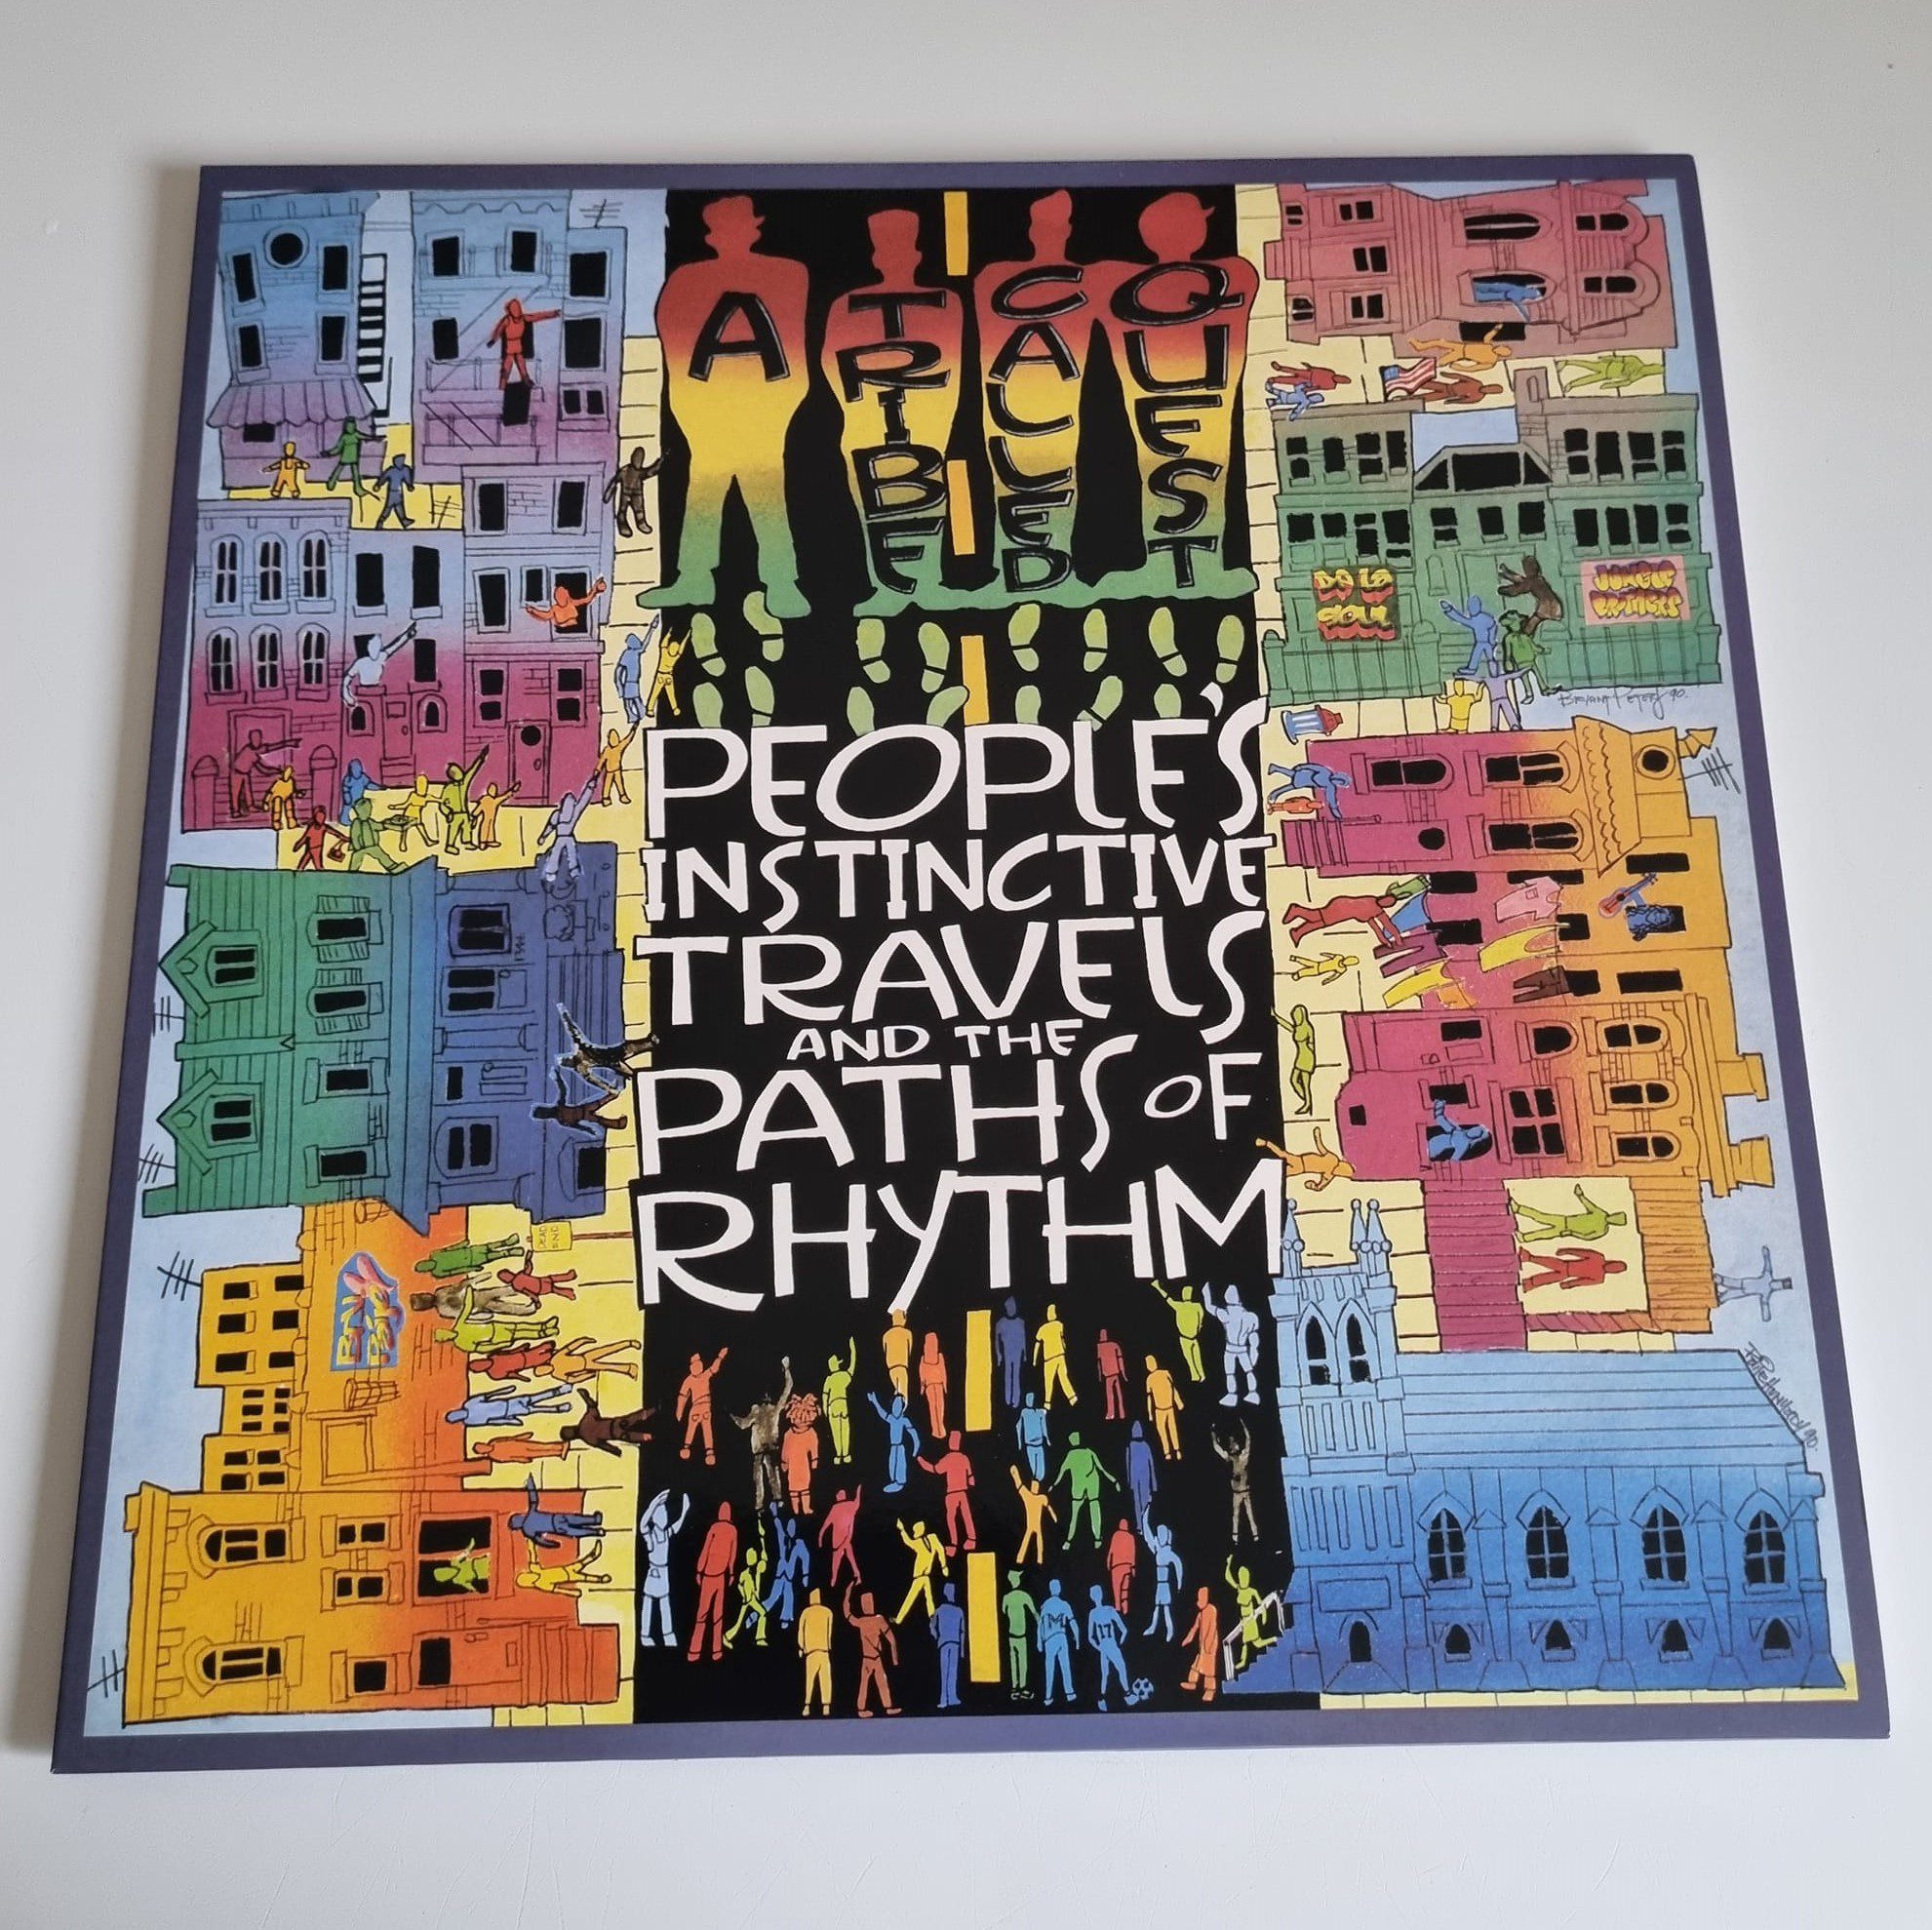 Buy this rare A Tribe Called Quest by clicking here